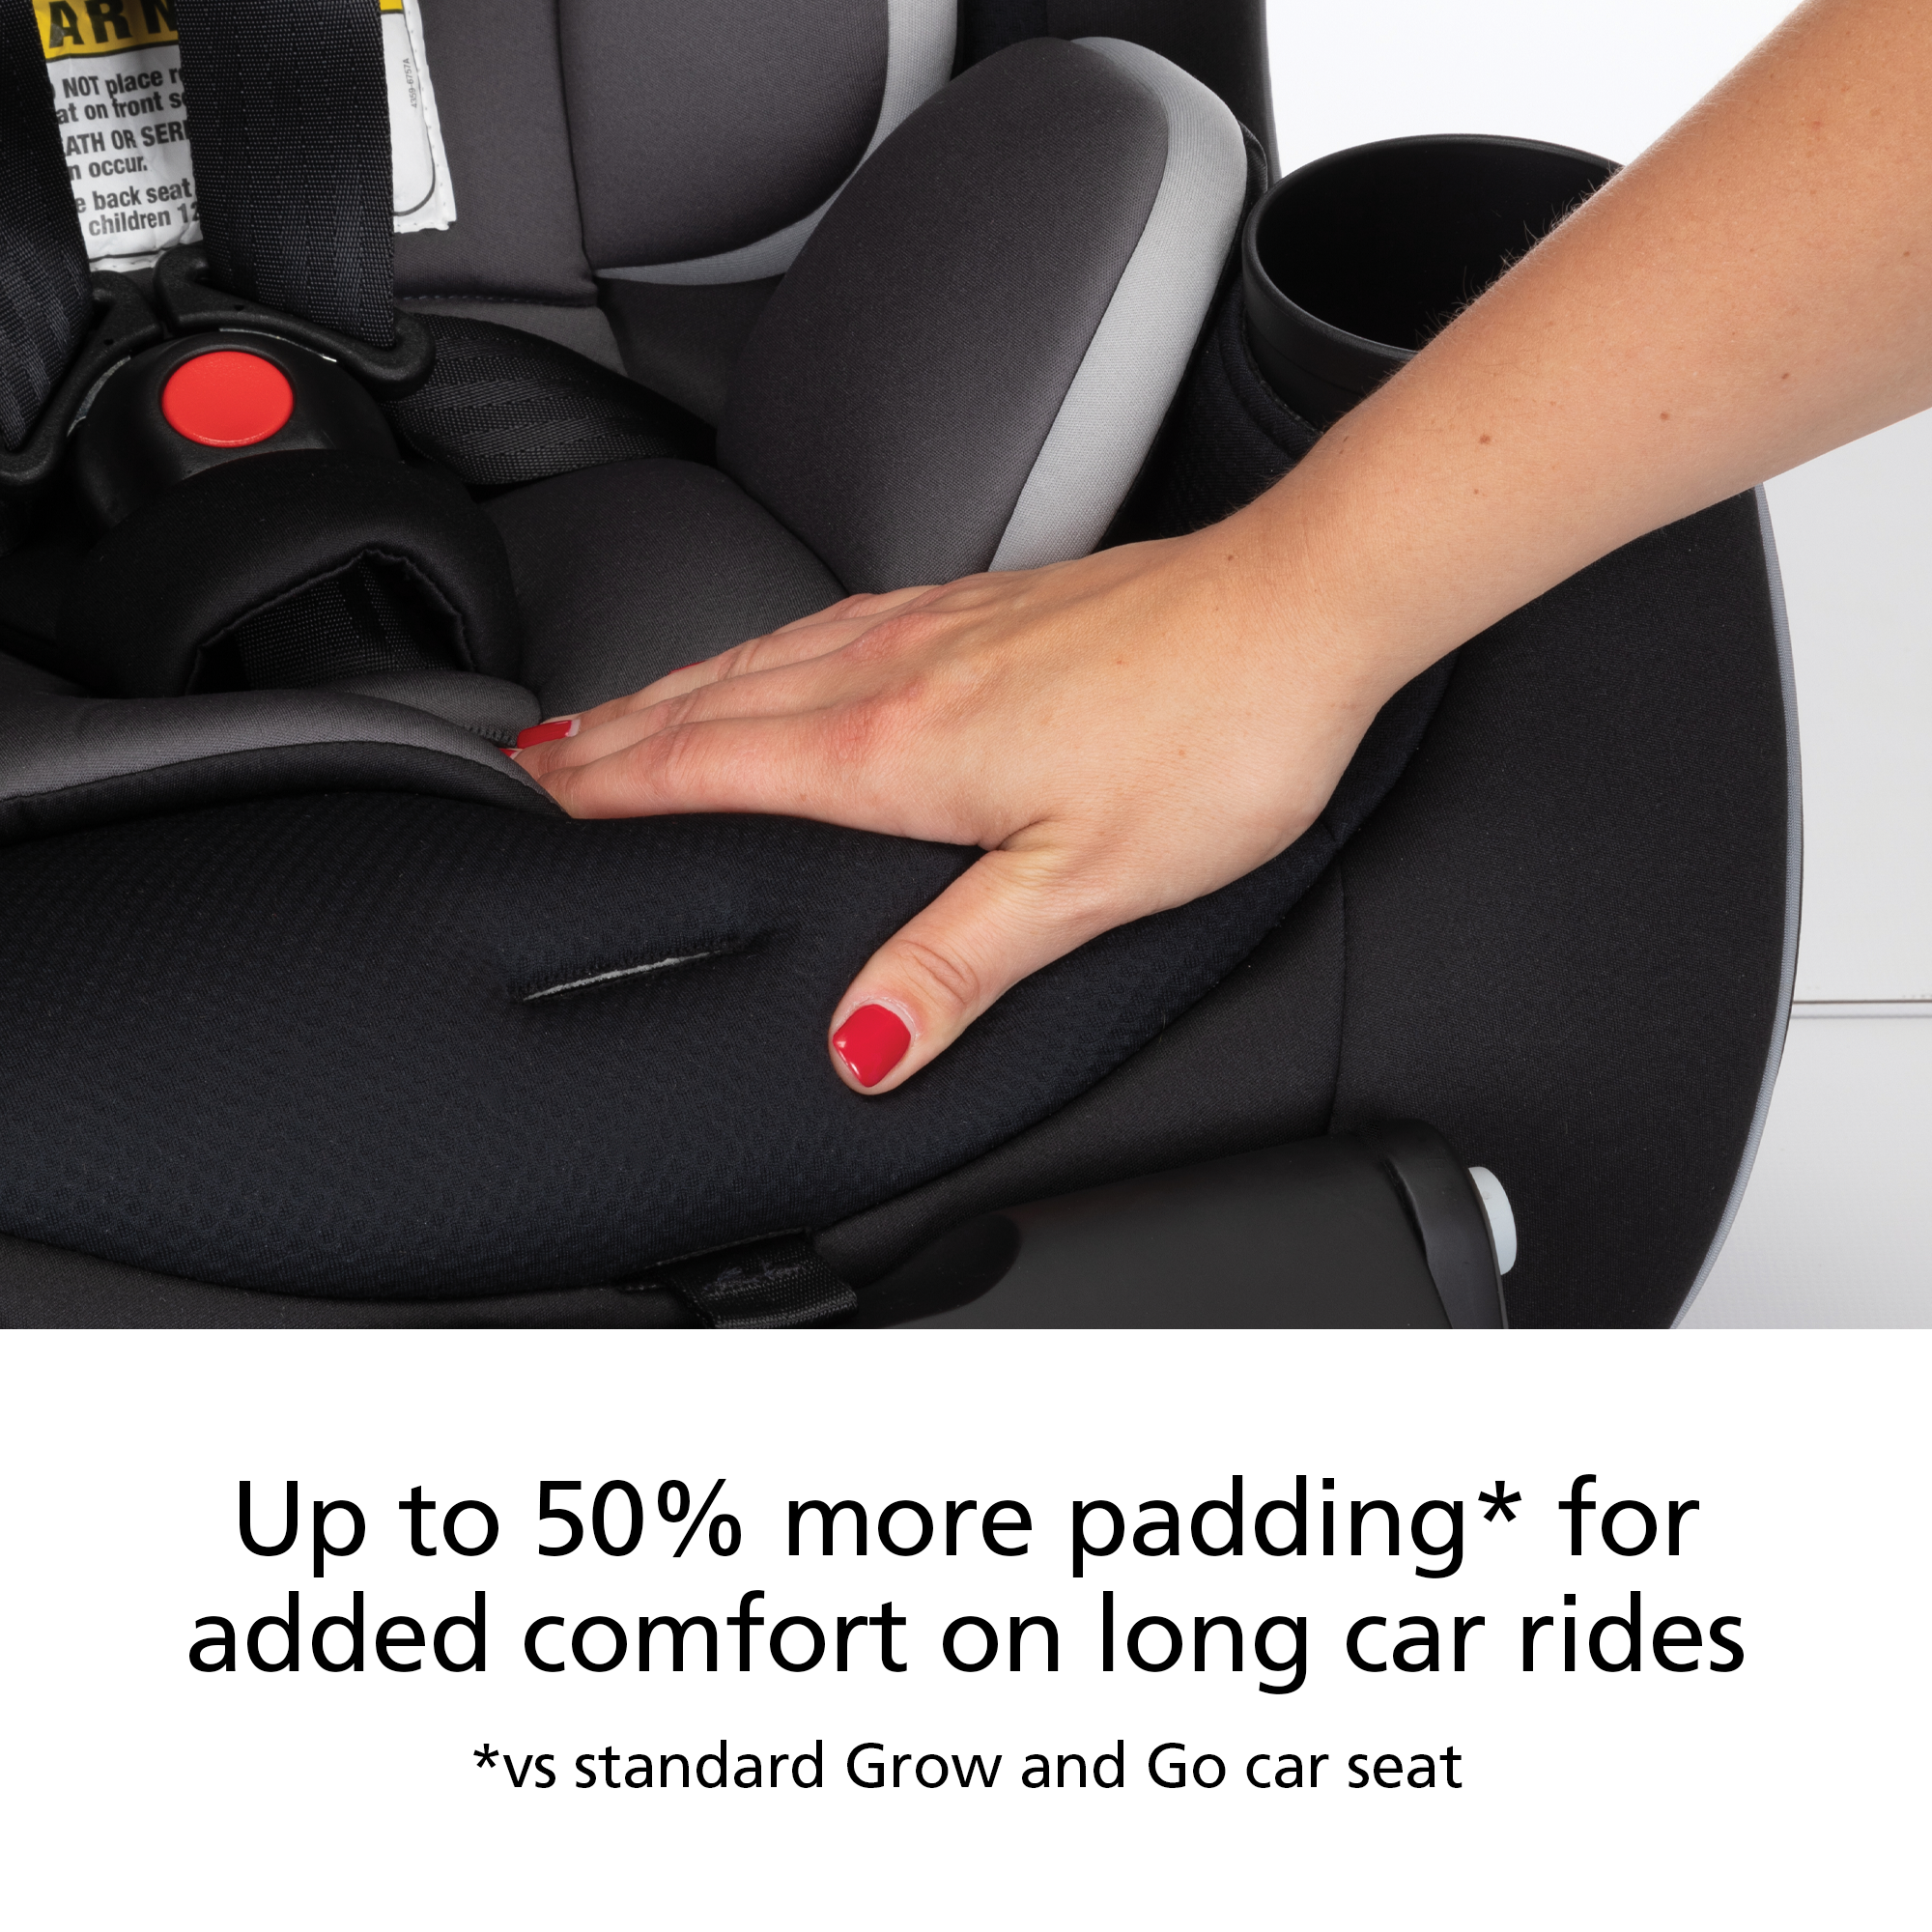 Grow and Go™ Extend 'n Ride LX - ComfortPlus footrest helps kids sit more comfortably and supports shorter, dangling legs